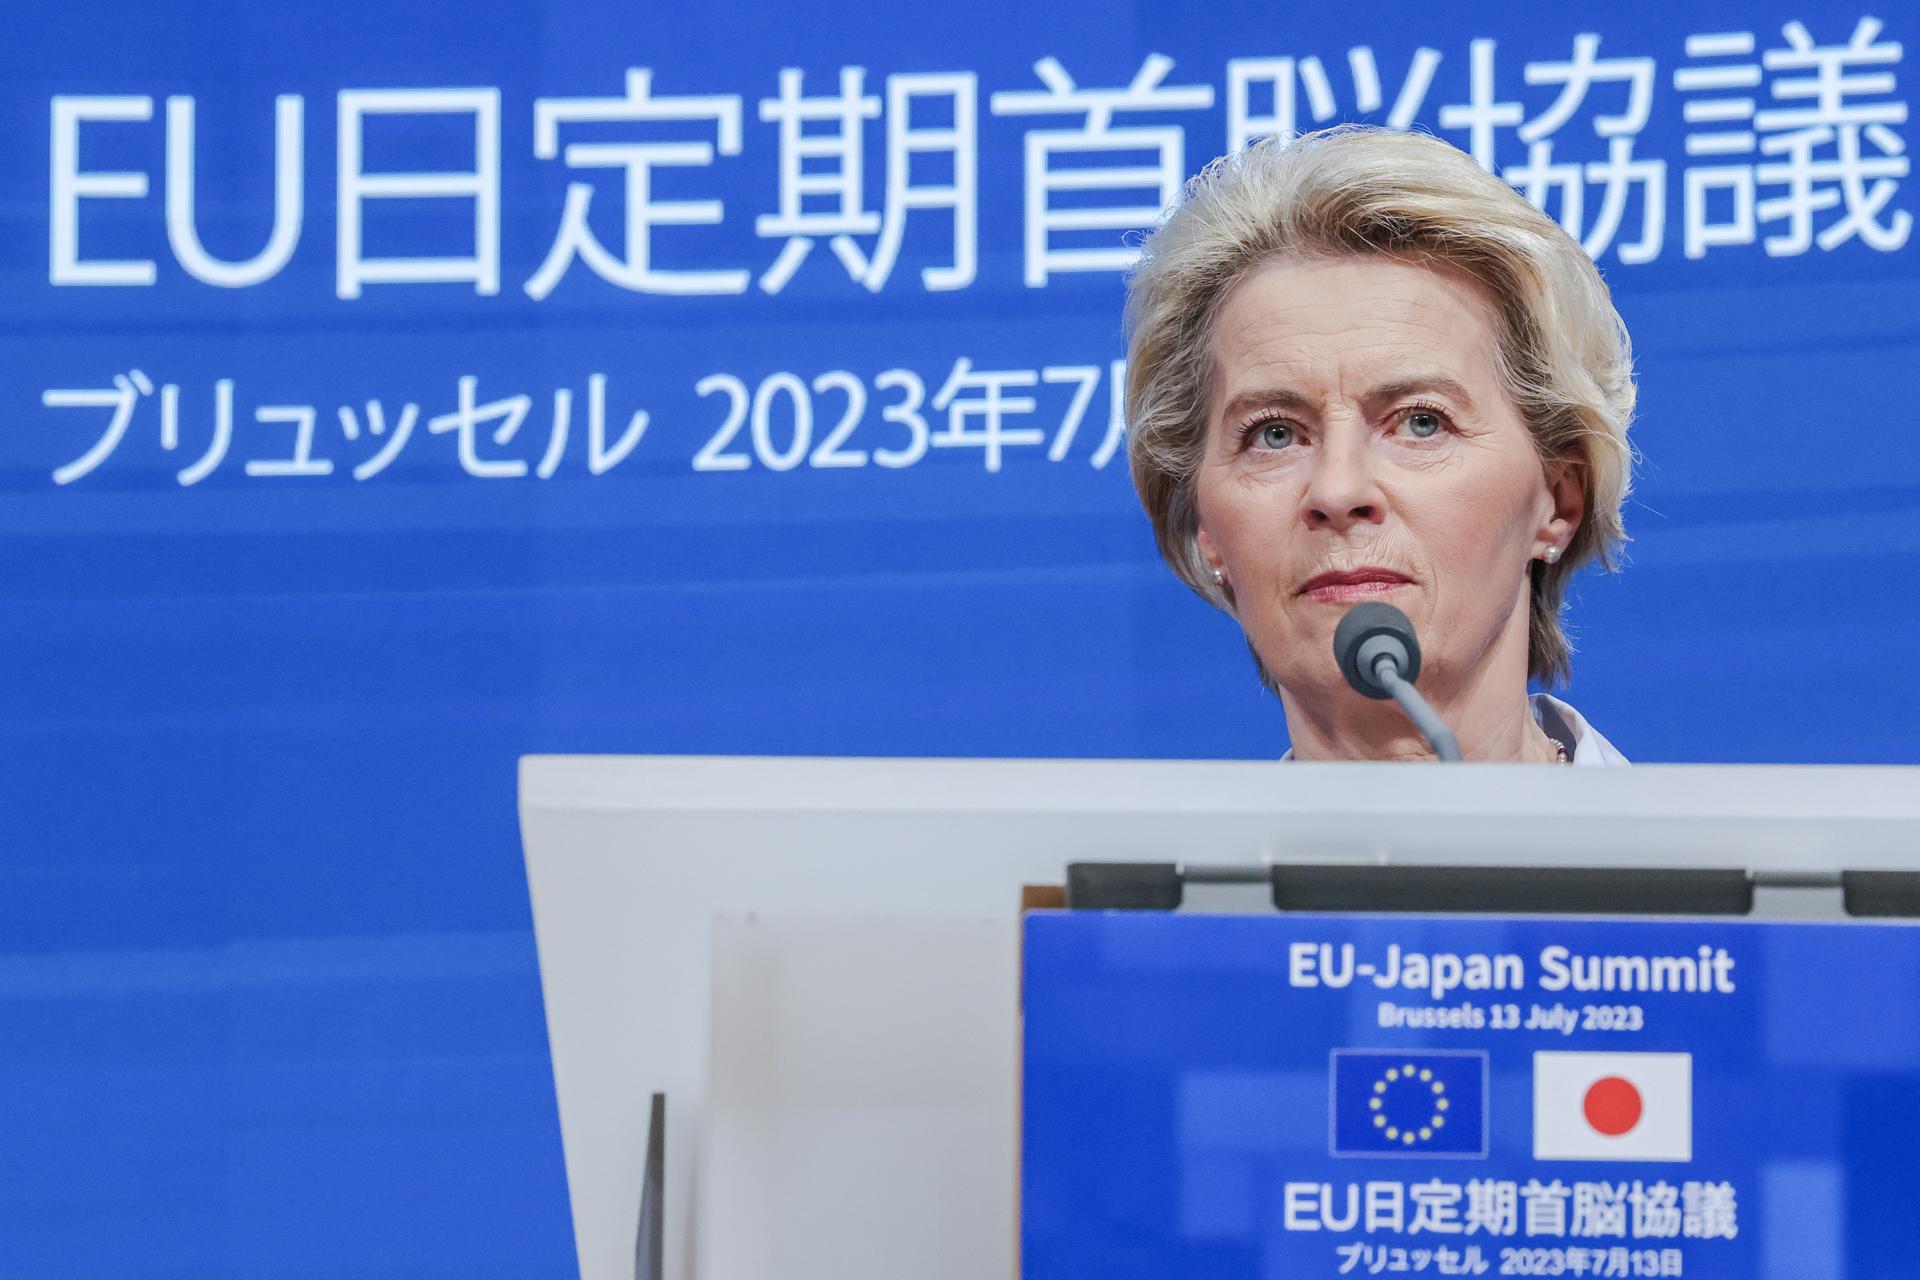 Brussels (Belgium), 13/07/2023.- European Commission President Ursula von der Leyen speaks during a press conference with Japan's Prime Minister Fumio Kishida and European Council President Charles Michel after the 29th EU-Japan summit in Brussels, Belgium, 13 July 2023. Japan is EU's closest partner in the Indo-Pacific region. The summit highlights this strong relationship as leaders take stock of progress on several partnerships and lay the ground for deeper cooperation. (Bélgica, Japón, Bruselas) EFE/EPA/OLIVIER MATTHYS